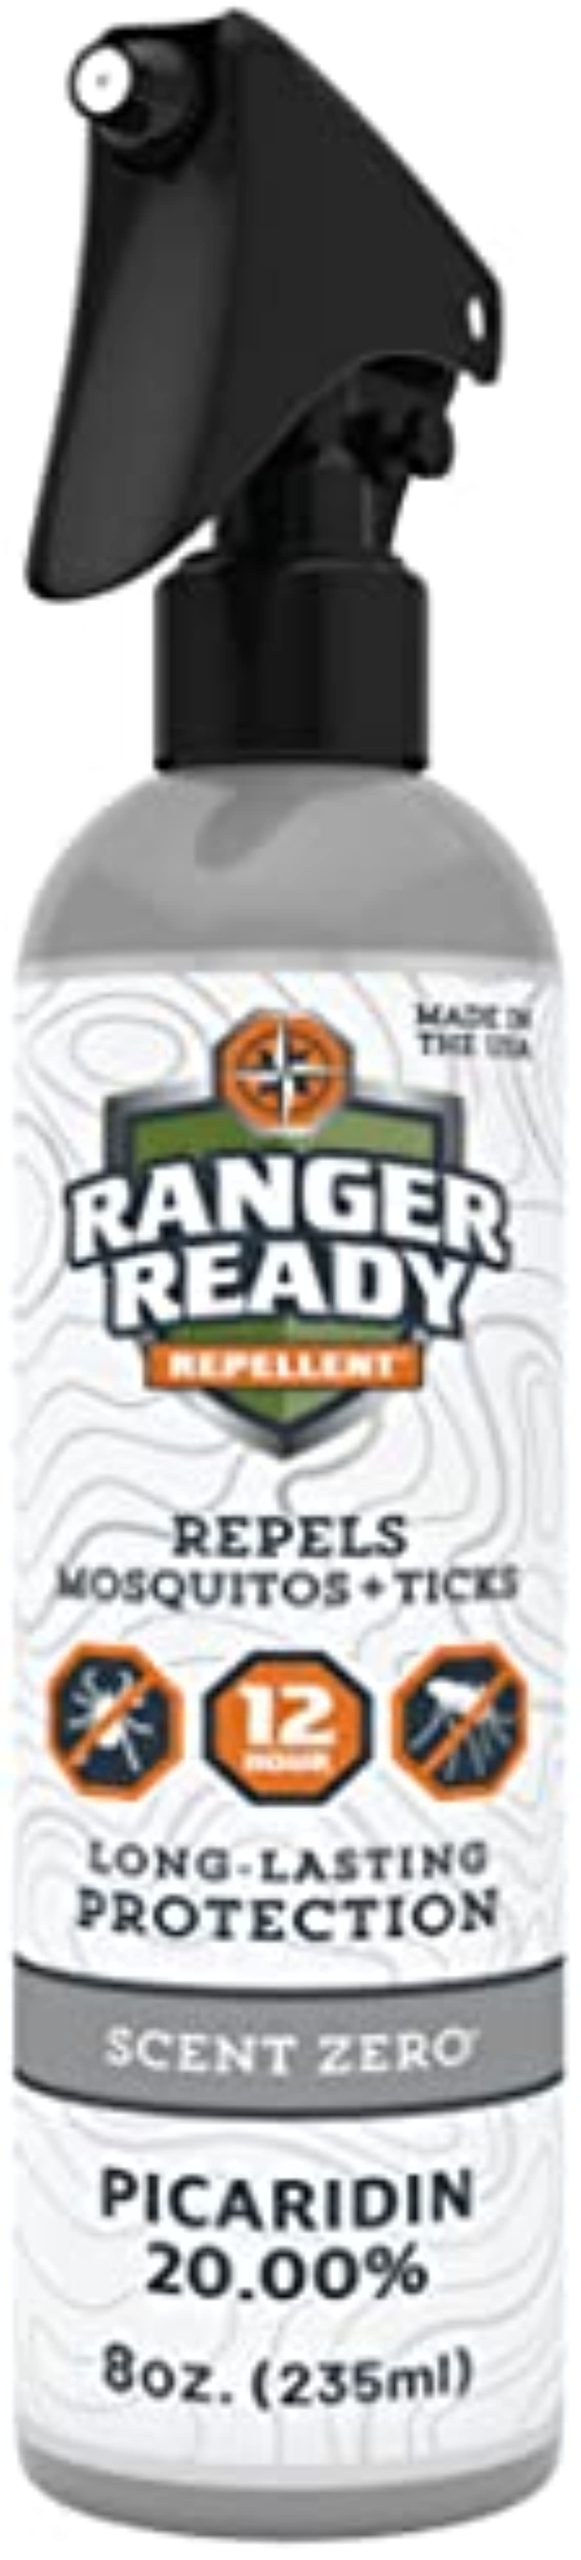 Ranger Ready Tick Spray and Insect Repellent, Picaridin 20{69d9aa324670335af8a1b4710bf3ca5e07996db942db3f4b4be93b9a913e5d96} Bug Spray, Scent Zero, 8 Oz.